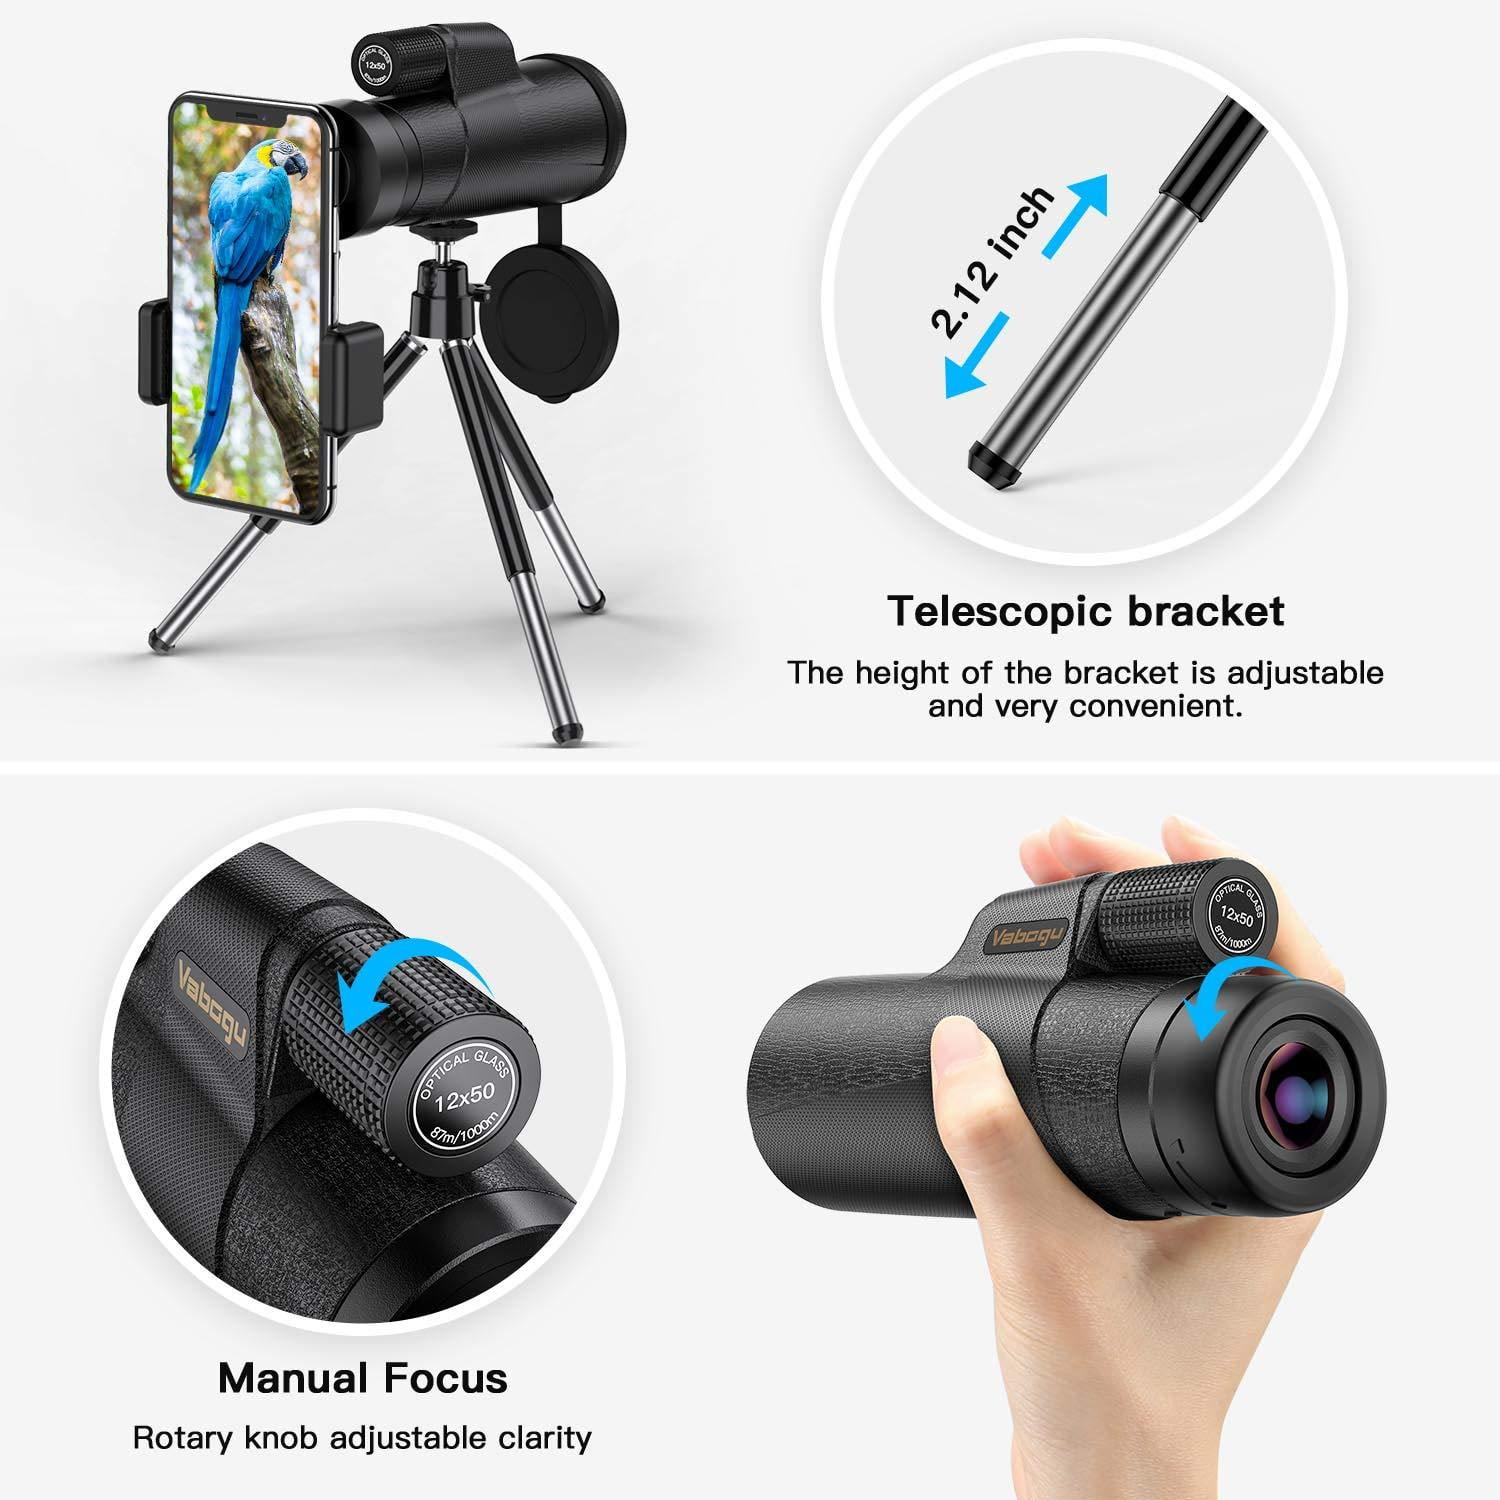 12X50 Monocular Telescope Waterproof Monocular for Smartphone with Monocular Case Holder&Tripod BAK4 Prism Monocular for Adults Kids for Bird Watching/Hunting/Camping/Hiking/Travelling/Wildlife 